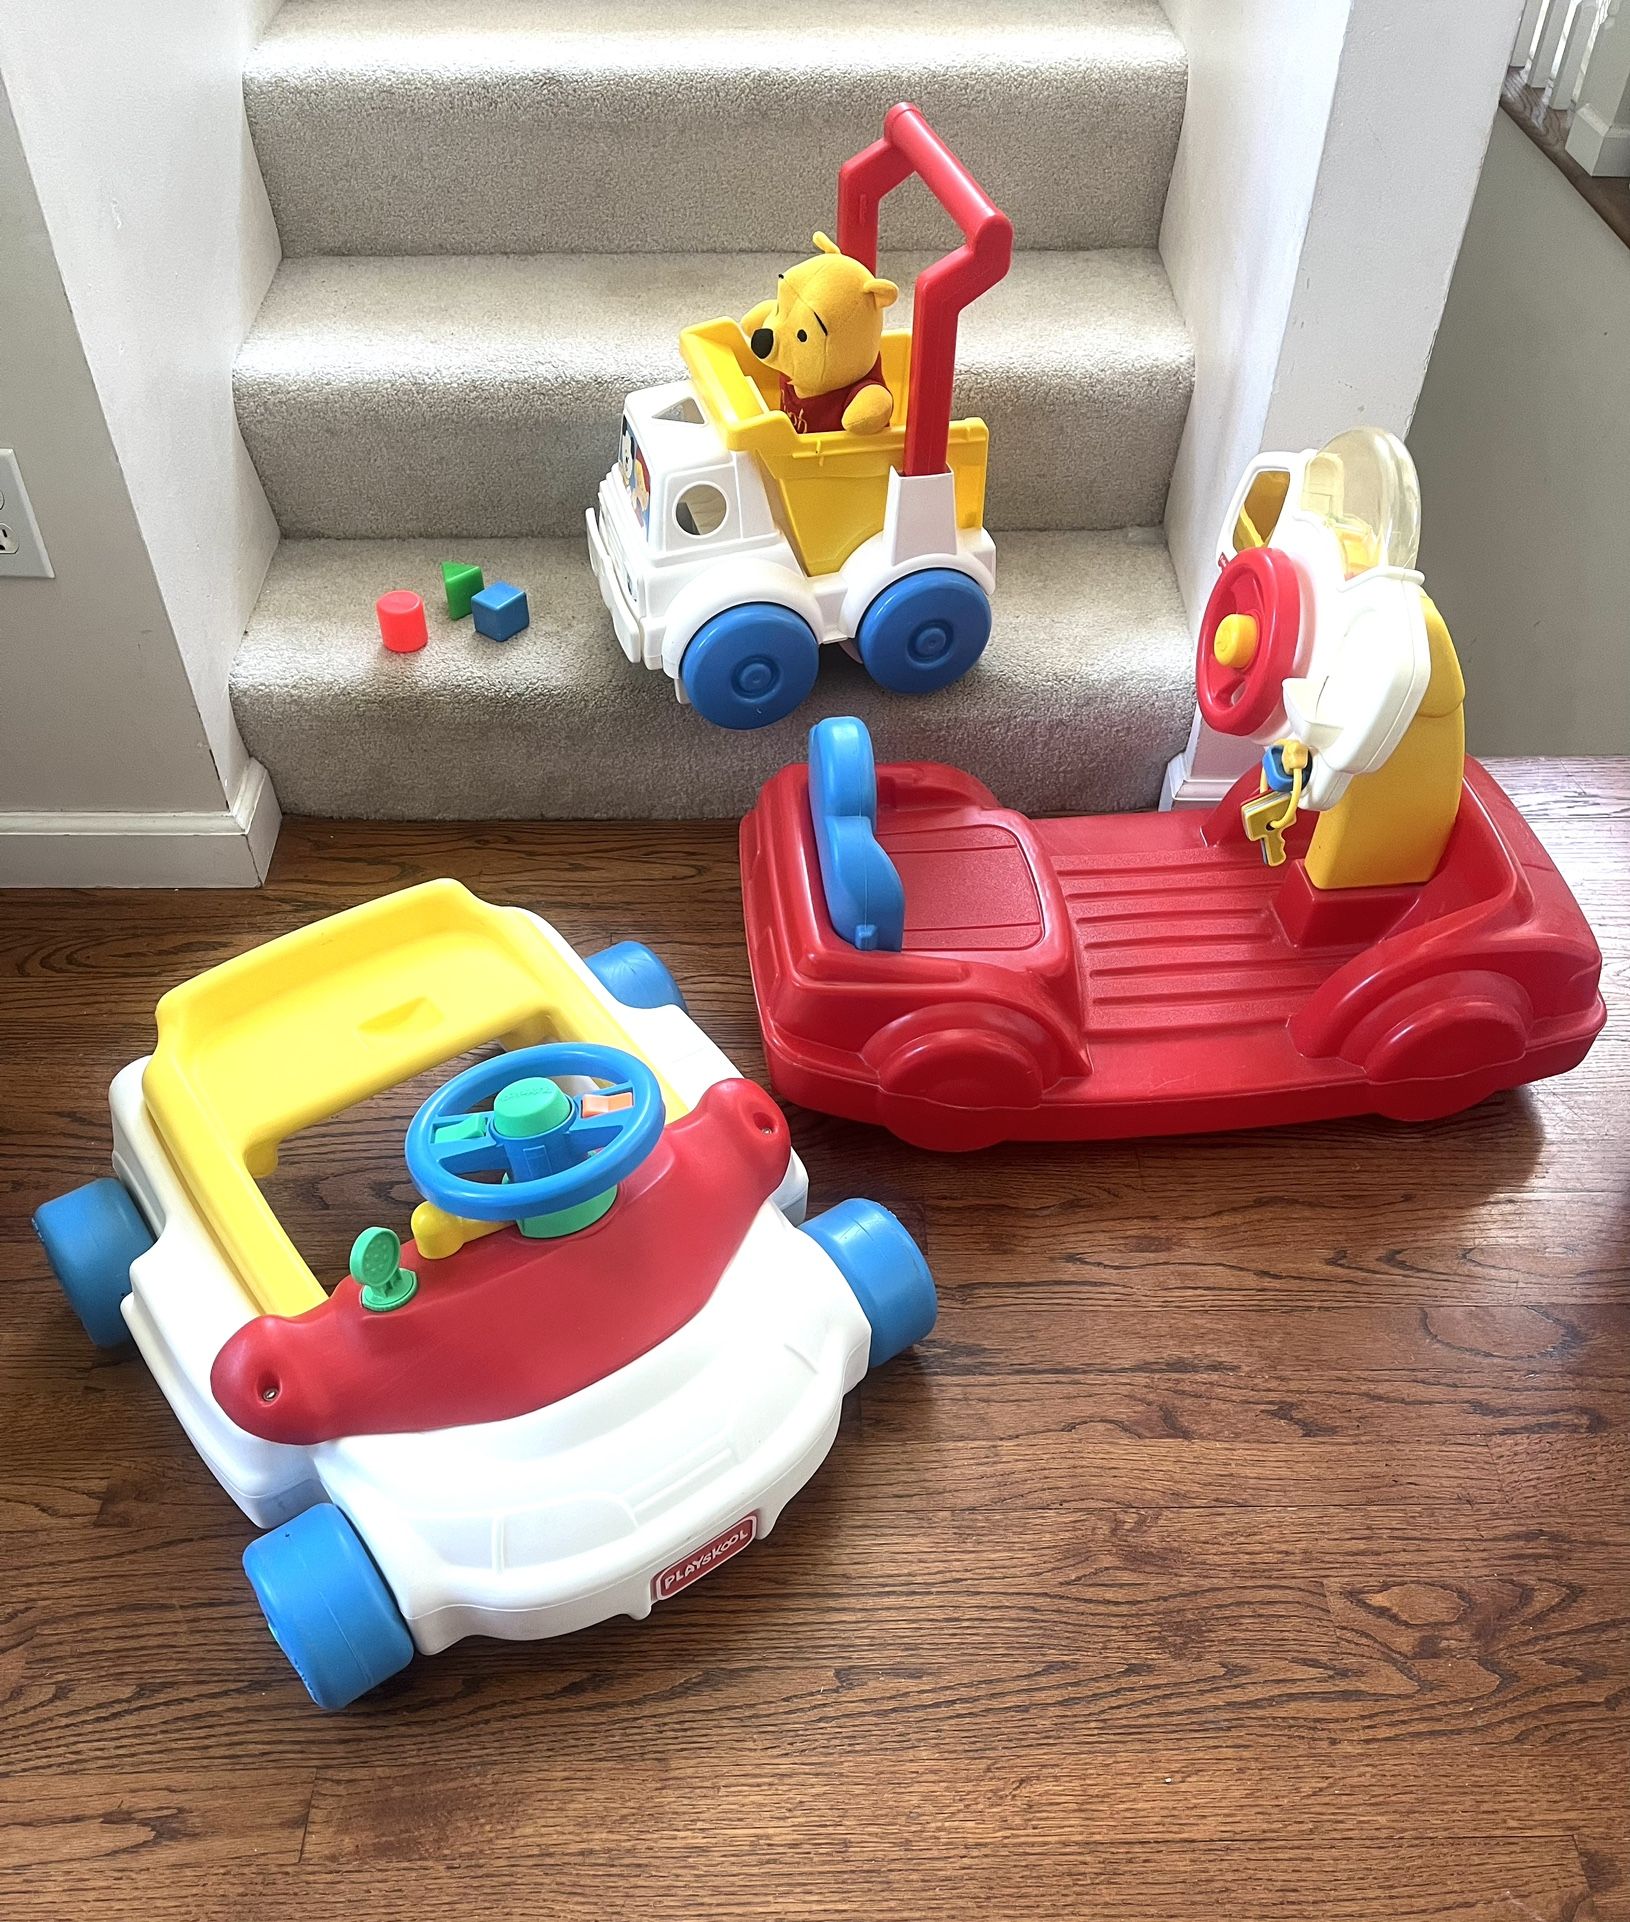 3 Vintage Kids Toys. Push Dump Truck & Shapes, Rocking Car With Popping Ball When “driving” & Sit N Drive Car ($20 Each Or All $45)